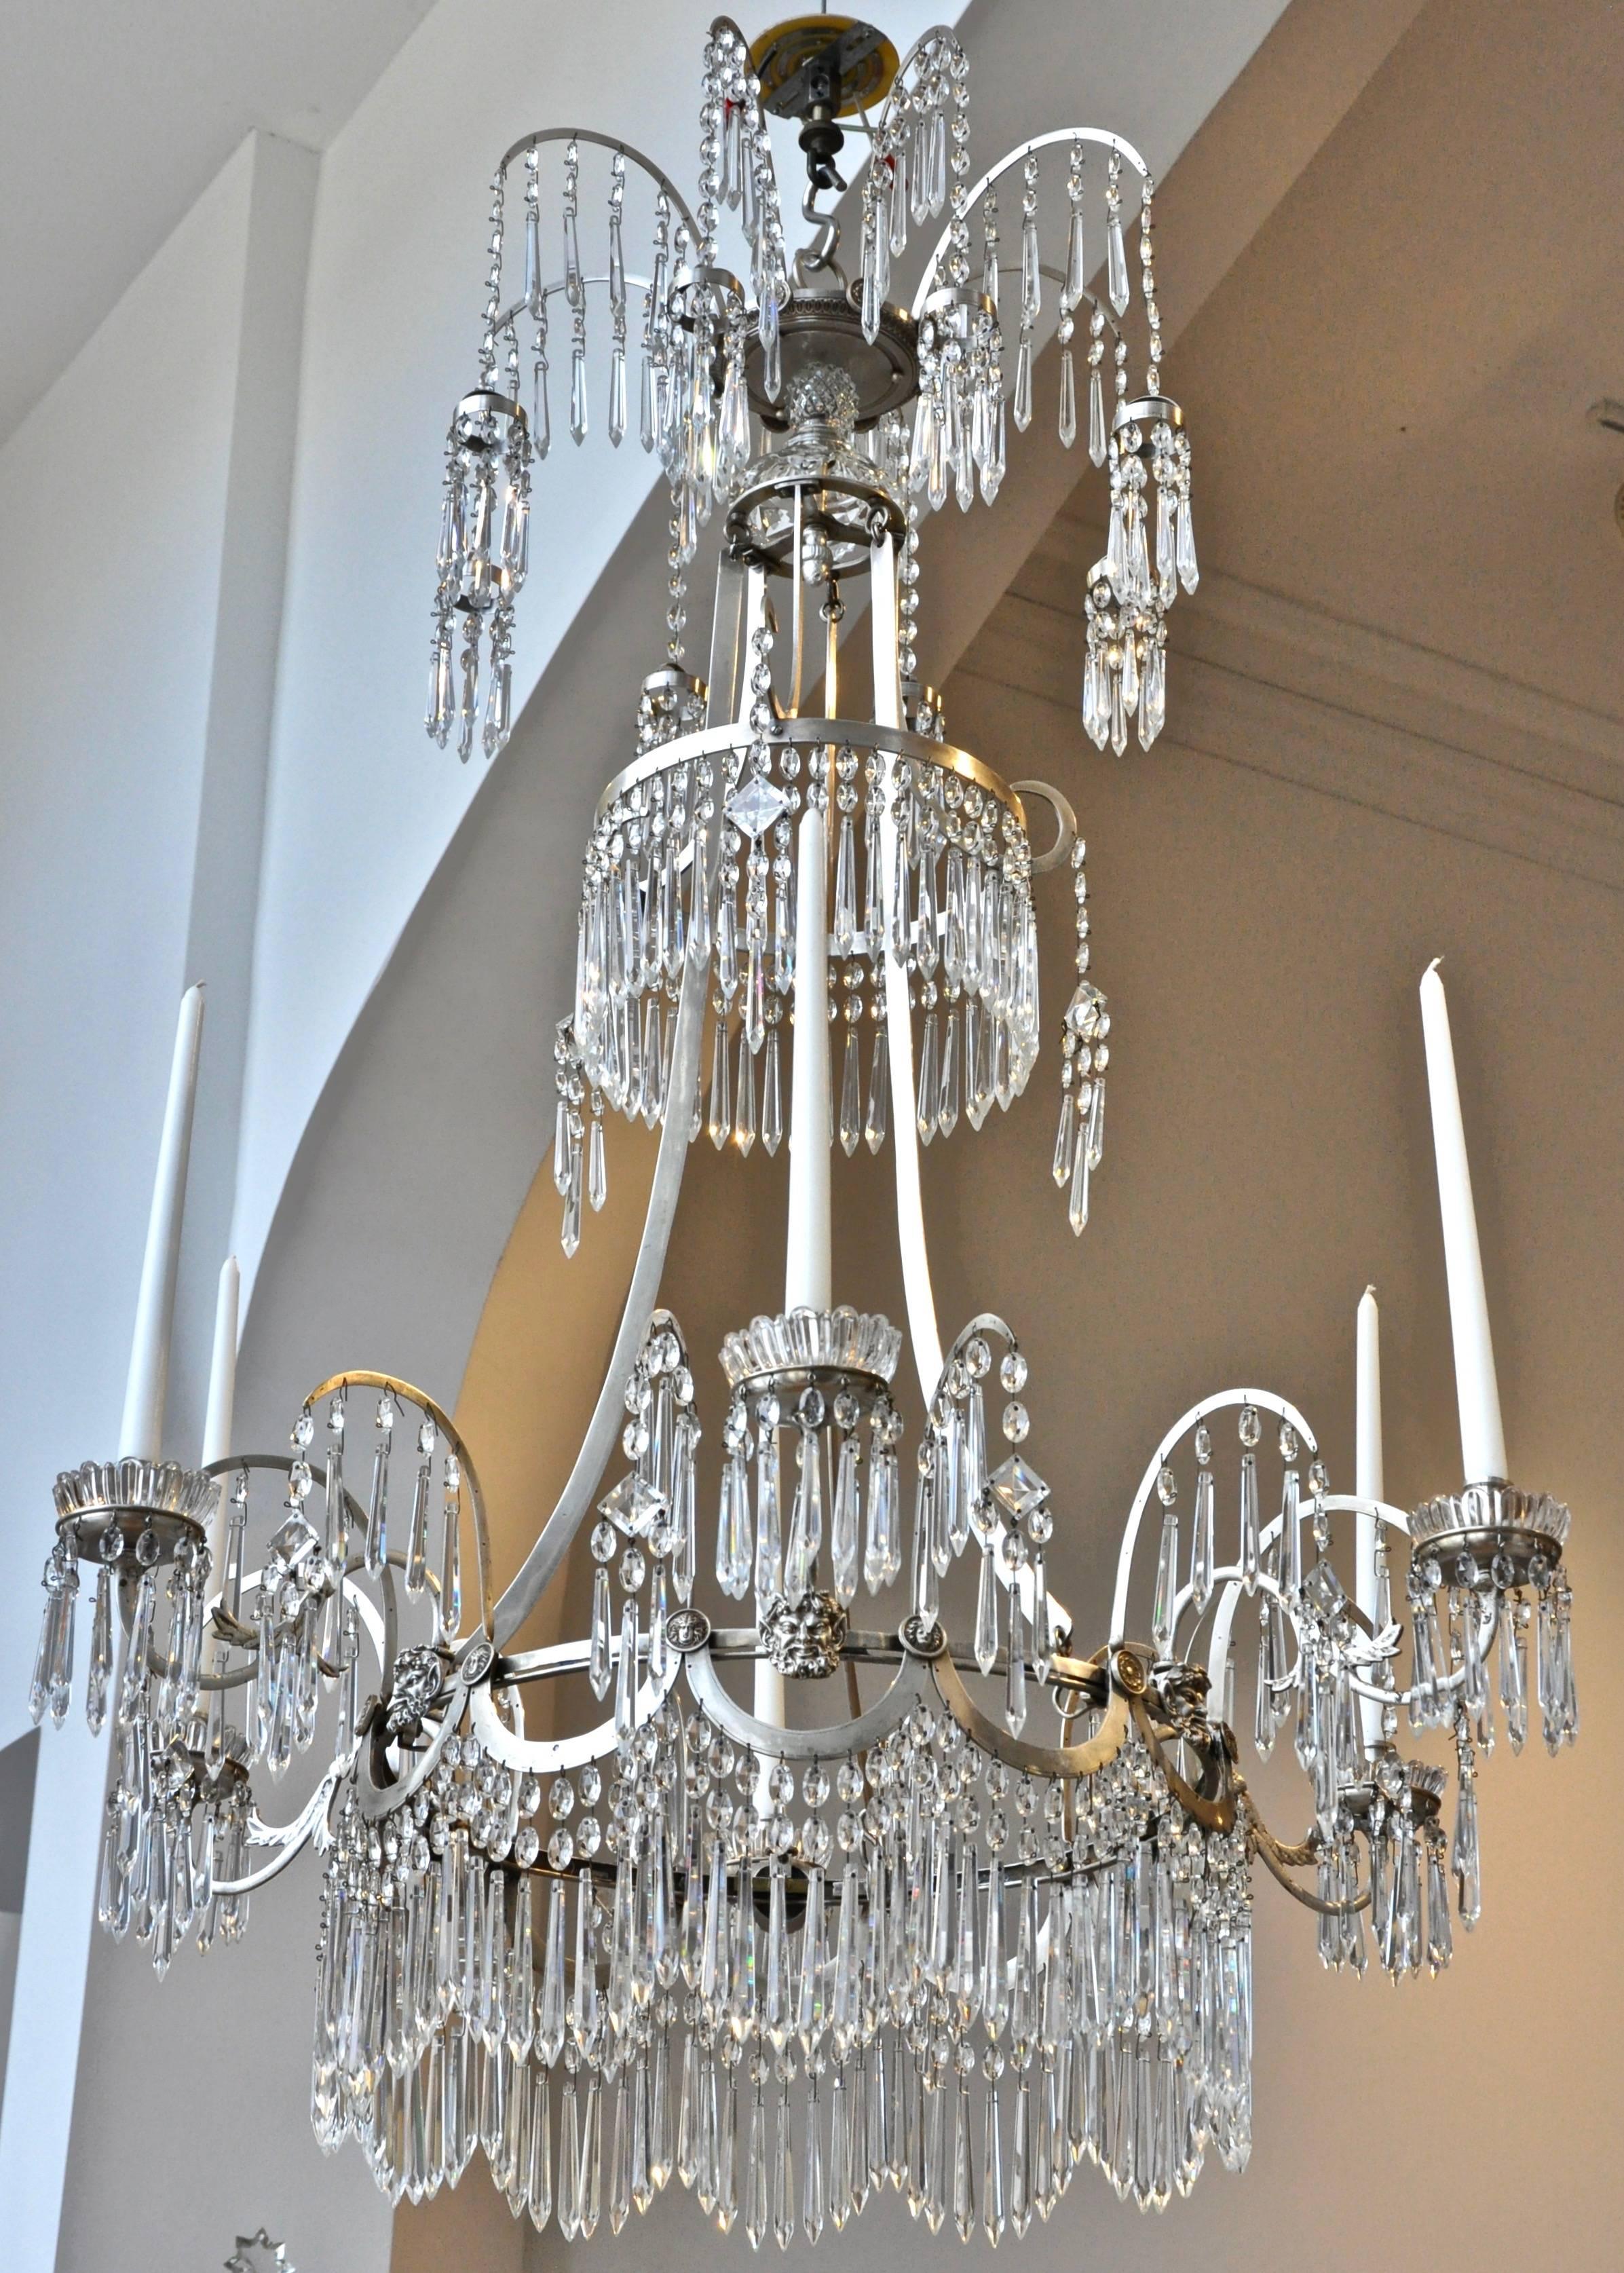 Beautiful 19th century silvered neoclassical chandelier.

- Palm frond motif with satyr masks and medusa plaques
- Original crystals
- Silver plate or nickel silver feels roman in its quality. Now lacquered as to not tarnish
- Can be French